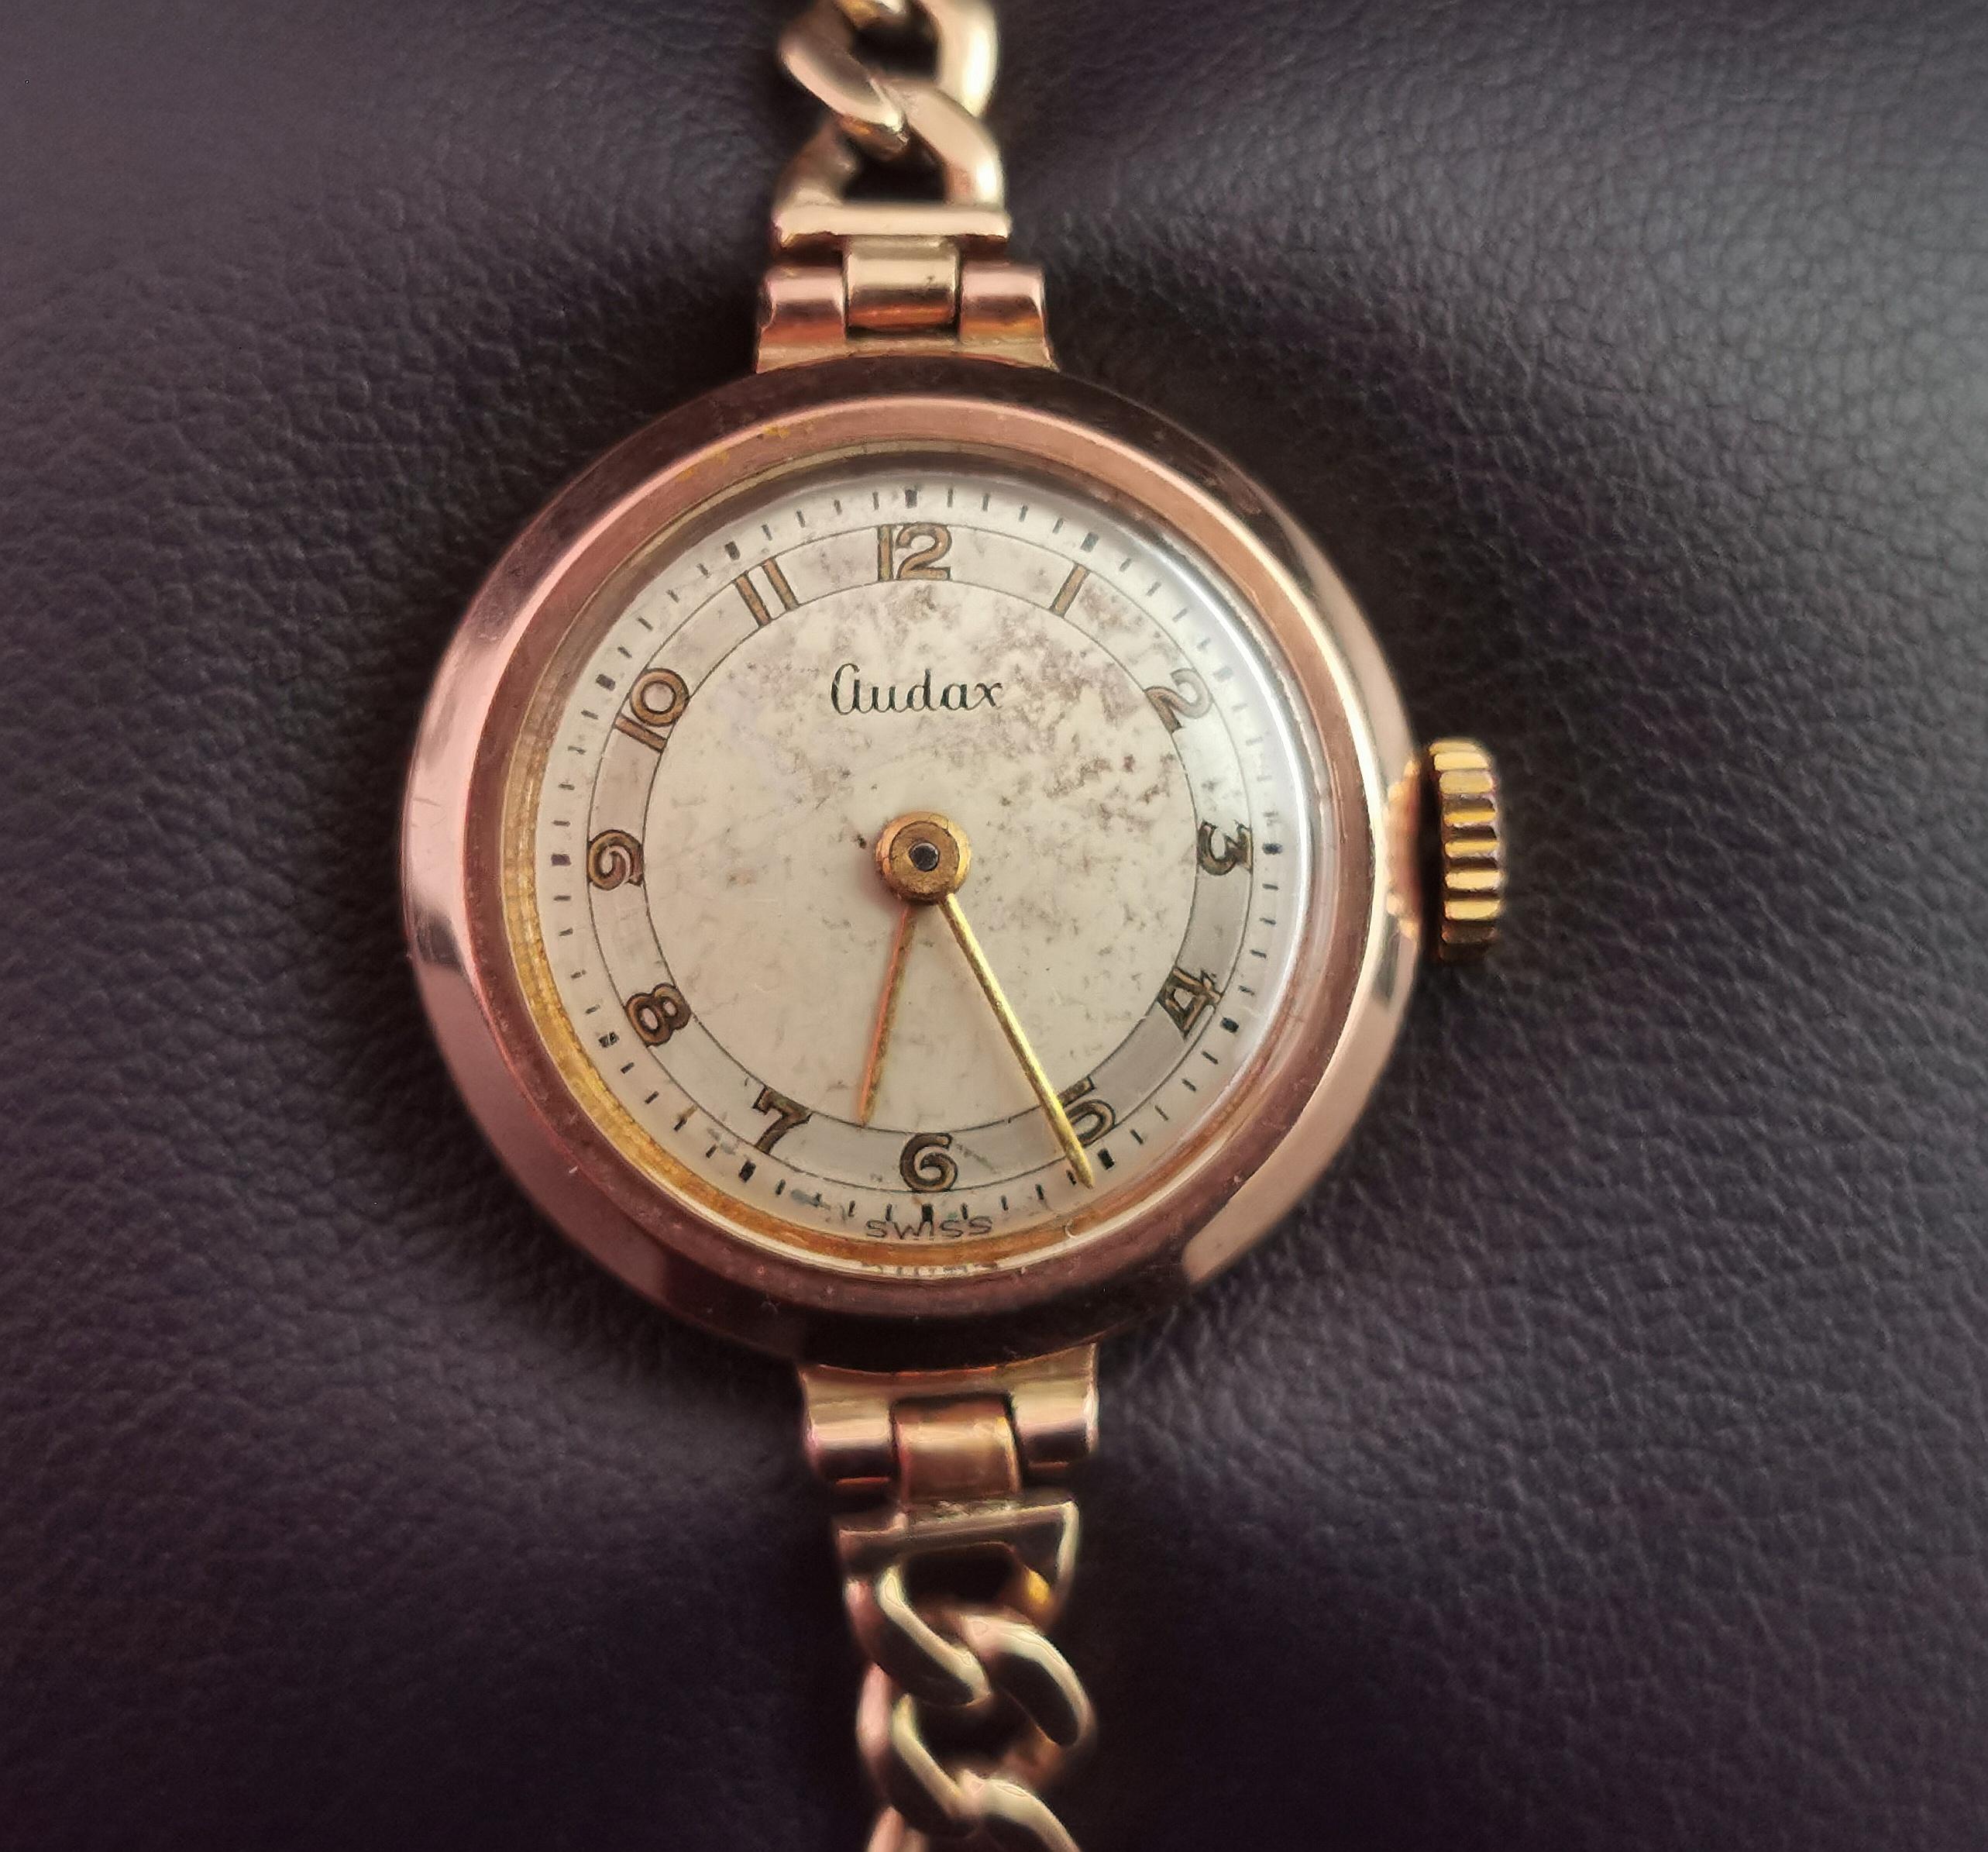 A gorgeous vintage 9kt gold ladies wristwatch.

Made by Audax it has a gorgeous vintage 9kt yellow gold curb chain bracelet strap.

Slightly rose toned yellow gold case with an off champagne enamel dial with bronze Arabic numerals and gold